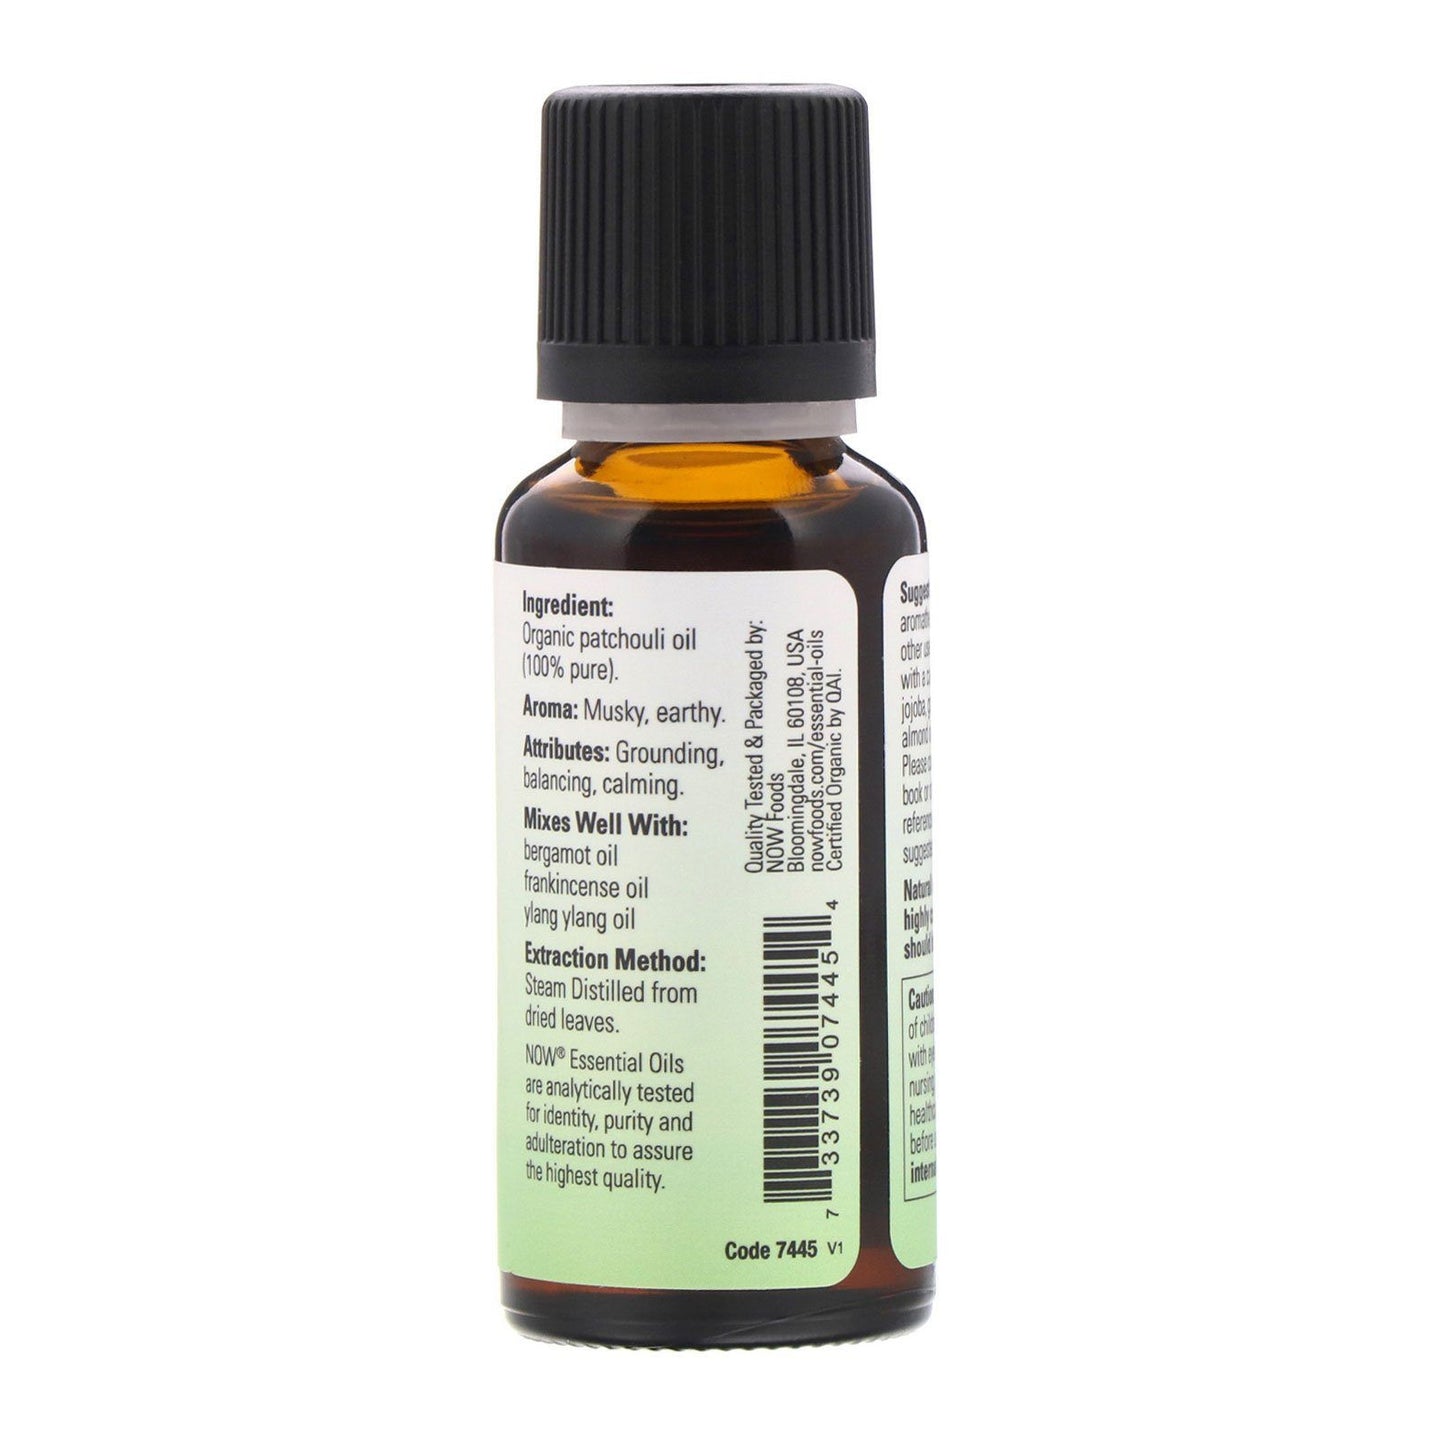 NOW Organic Patchouli Oil, Earthy Aromatherapy Scent, Steam Distilled, 100% Pure, (30ml) - Bloom Concept